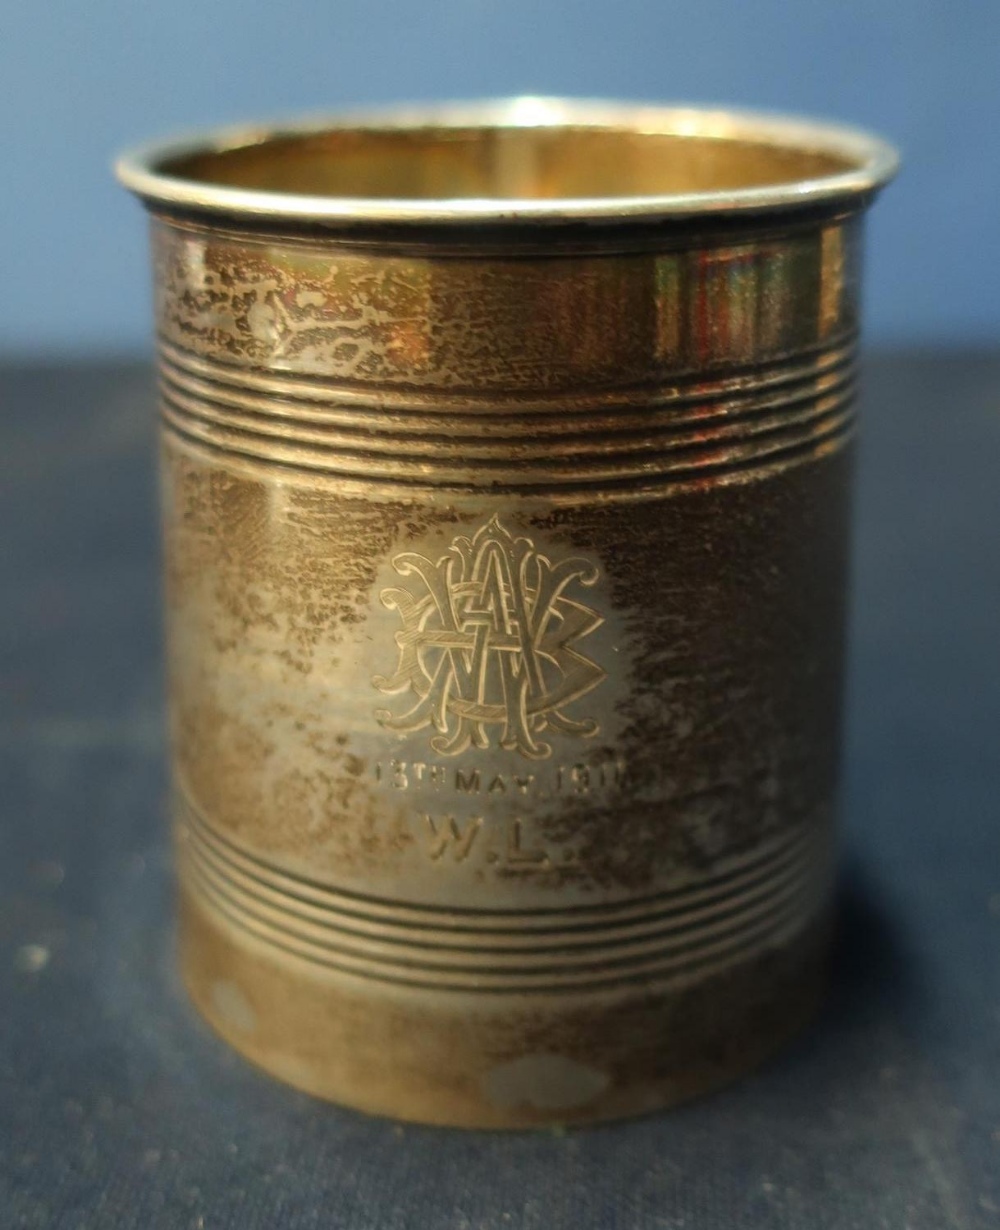 A Birmingham 1904 silver hallmarked christening cup engraved with monogram initials 13th May 1911